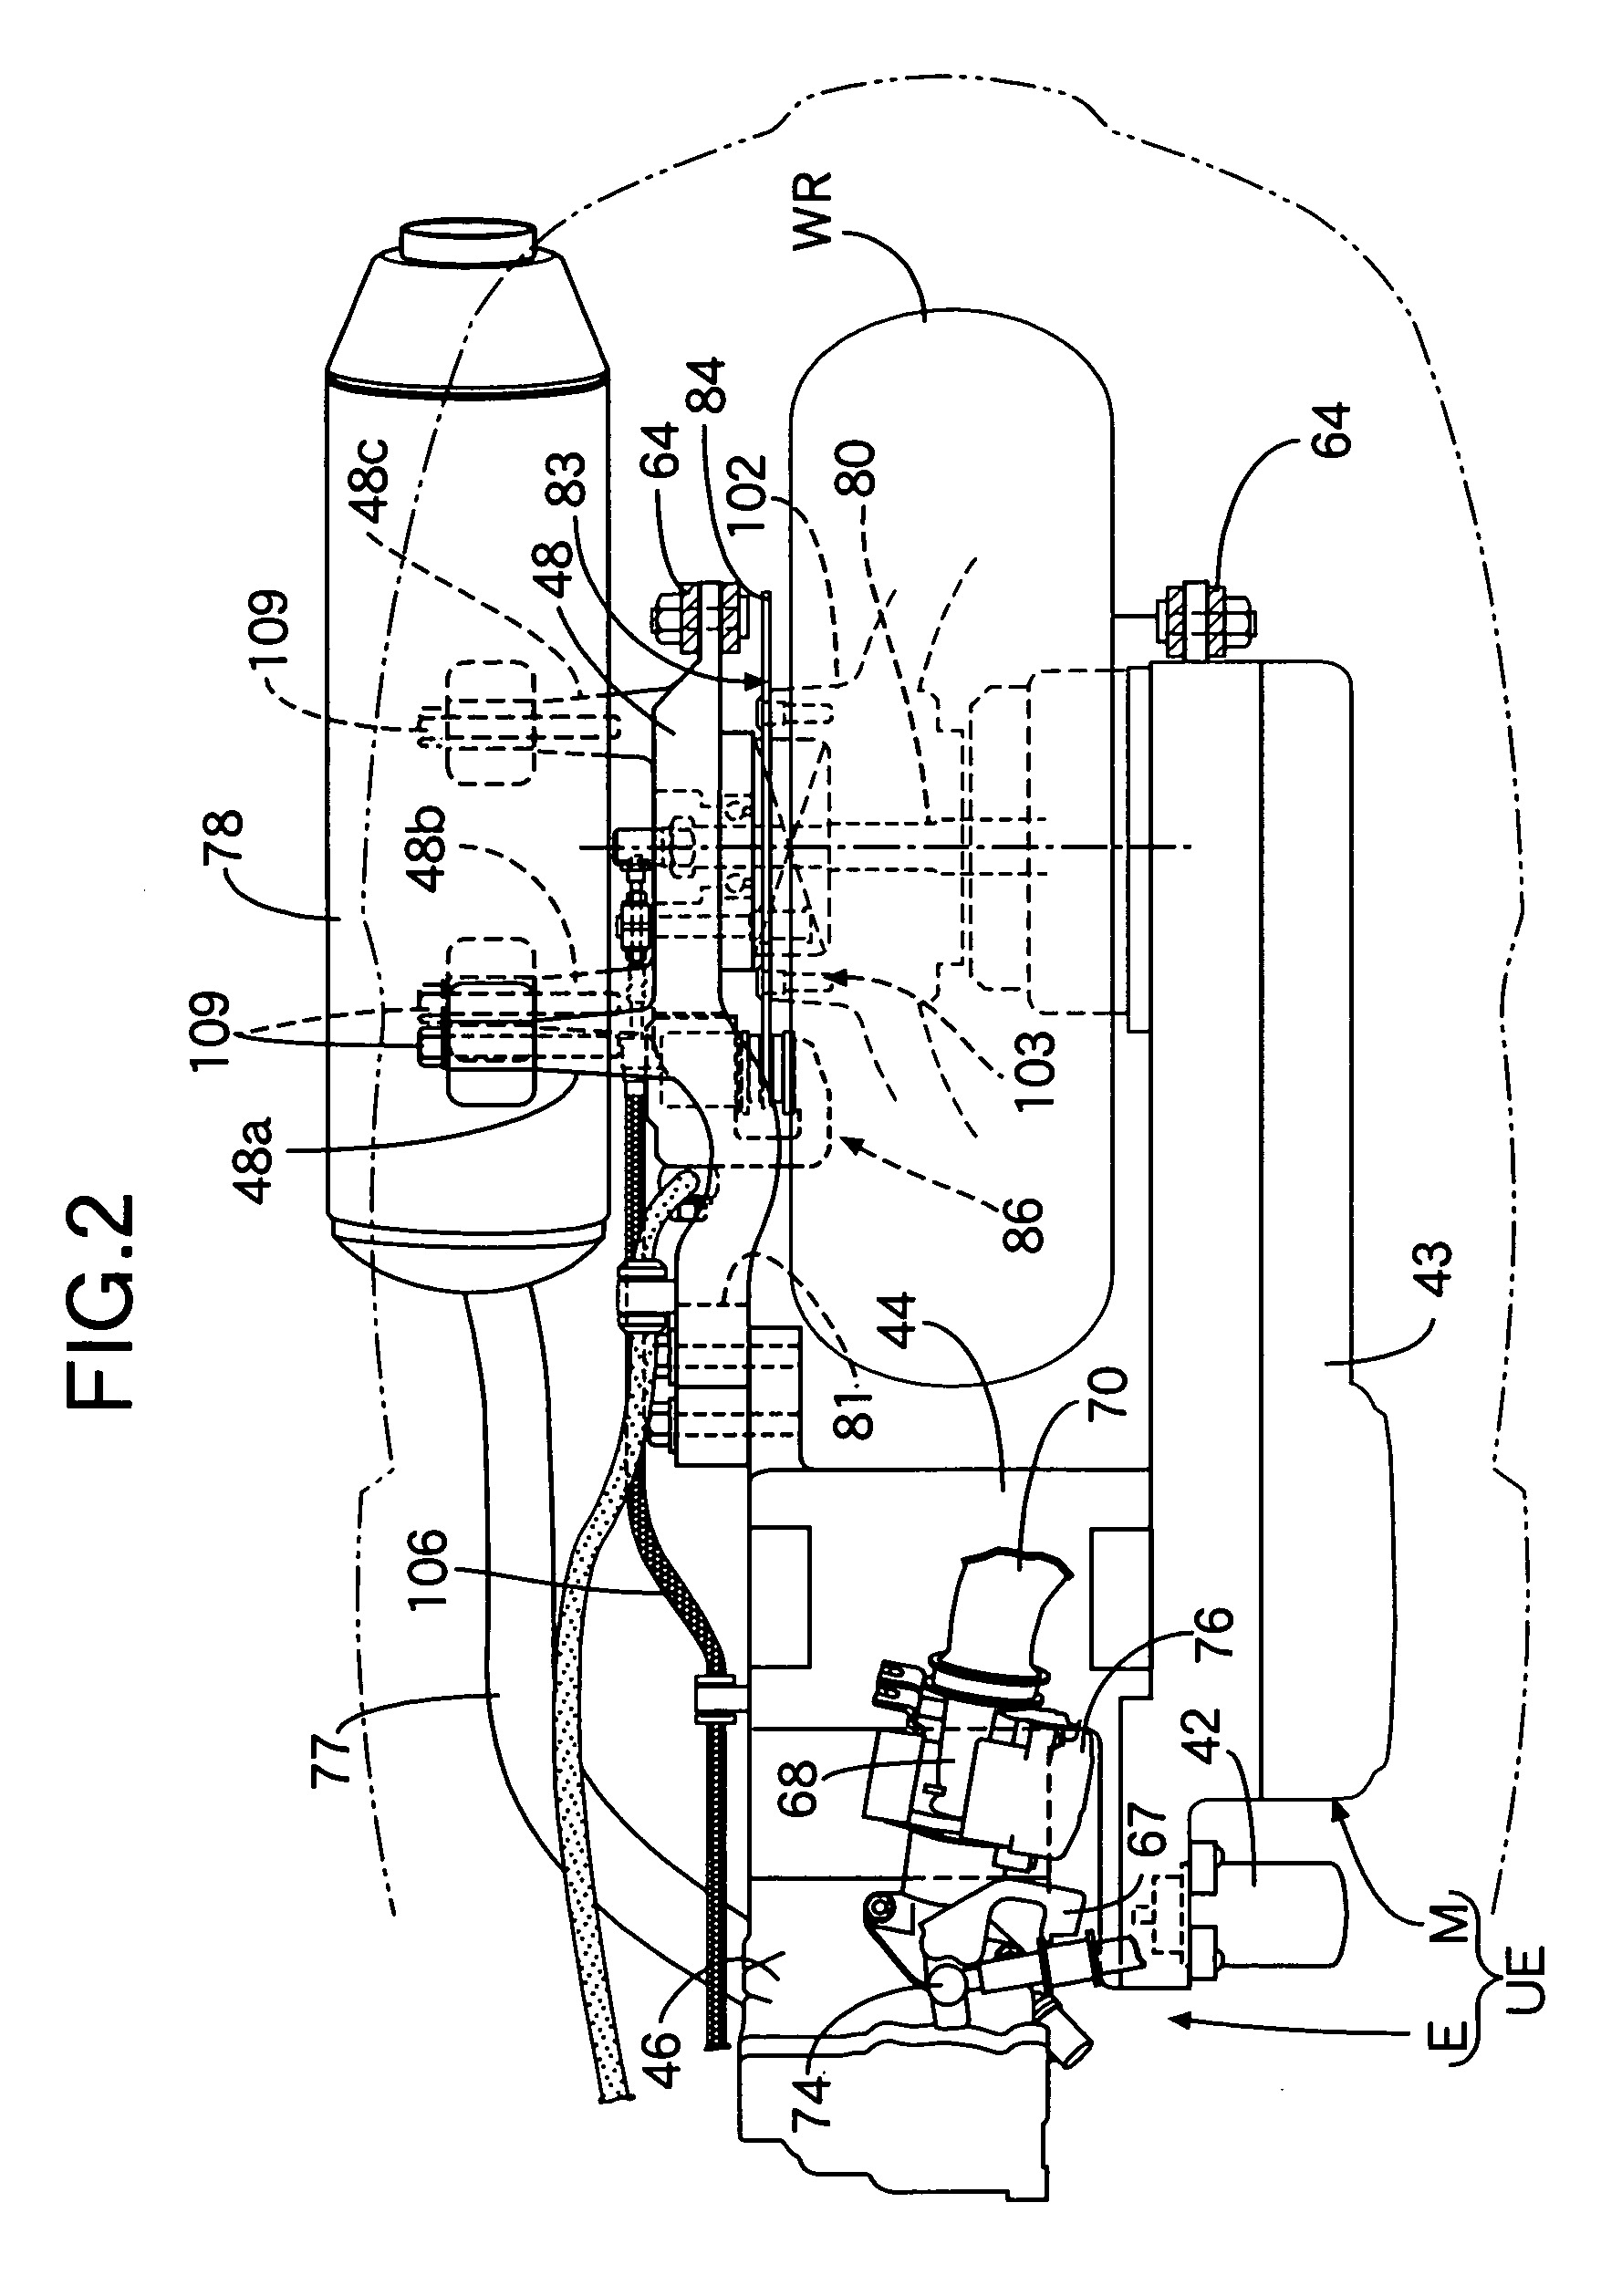 Pad remaining amount checking structure in disk brake of vehicle